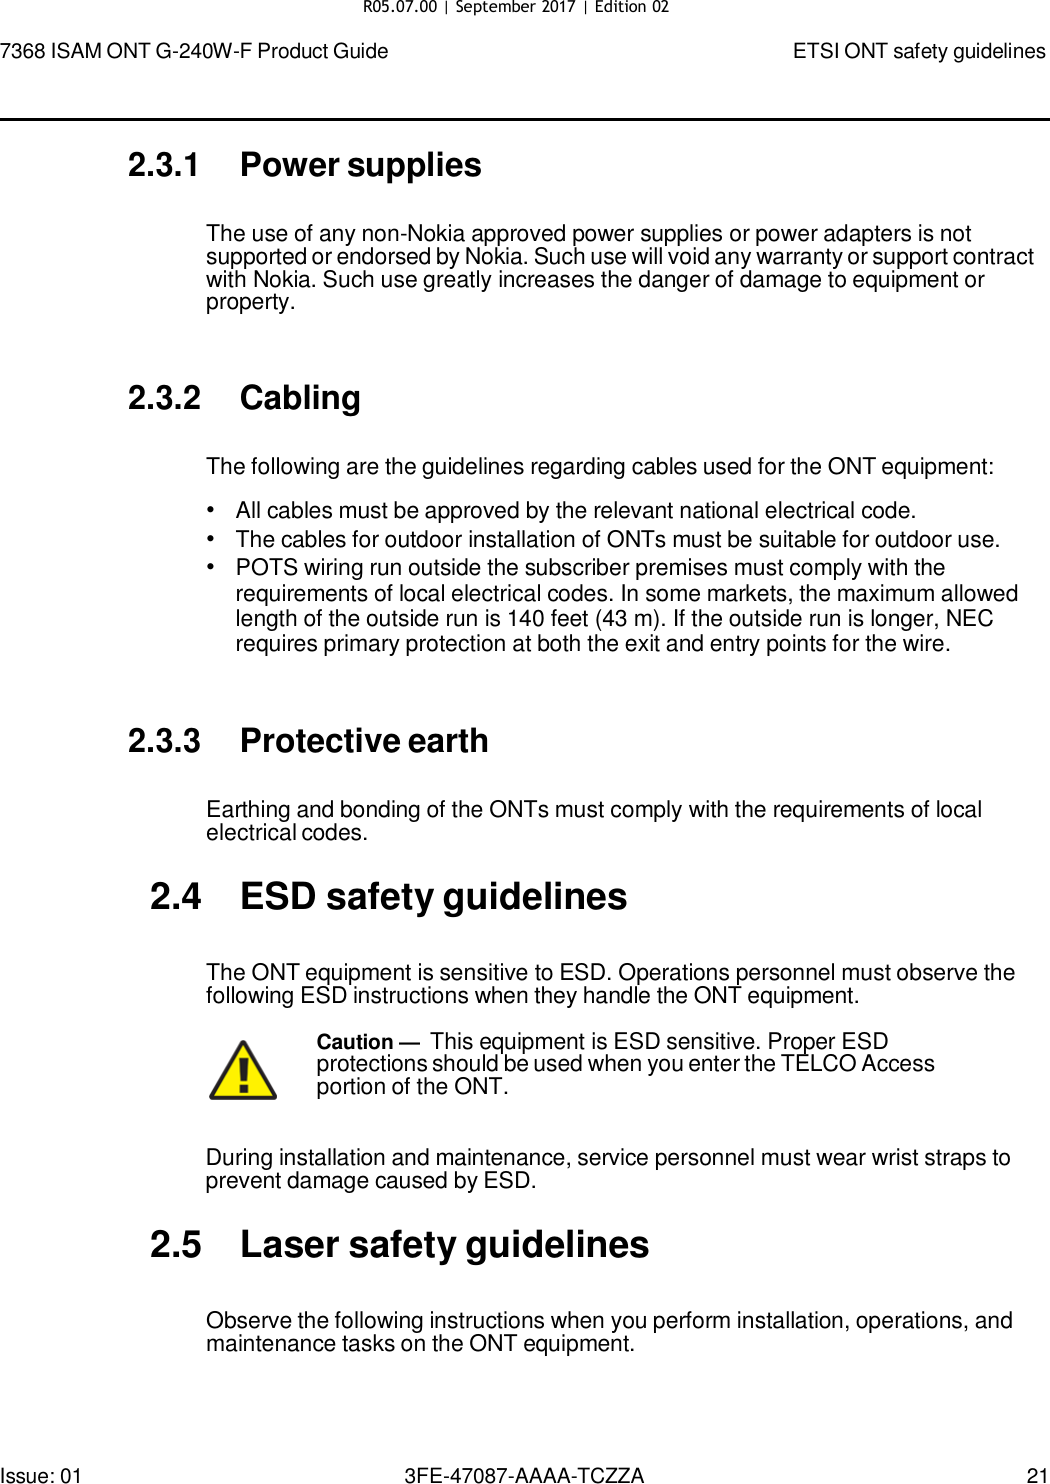 Page 19 of Nokia Bell G240WFV2 7368 ISAM GPON ONU User Manual 7368 ISAM ONT G 240W F Product Guide